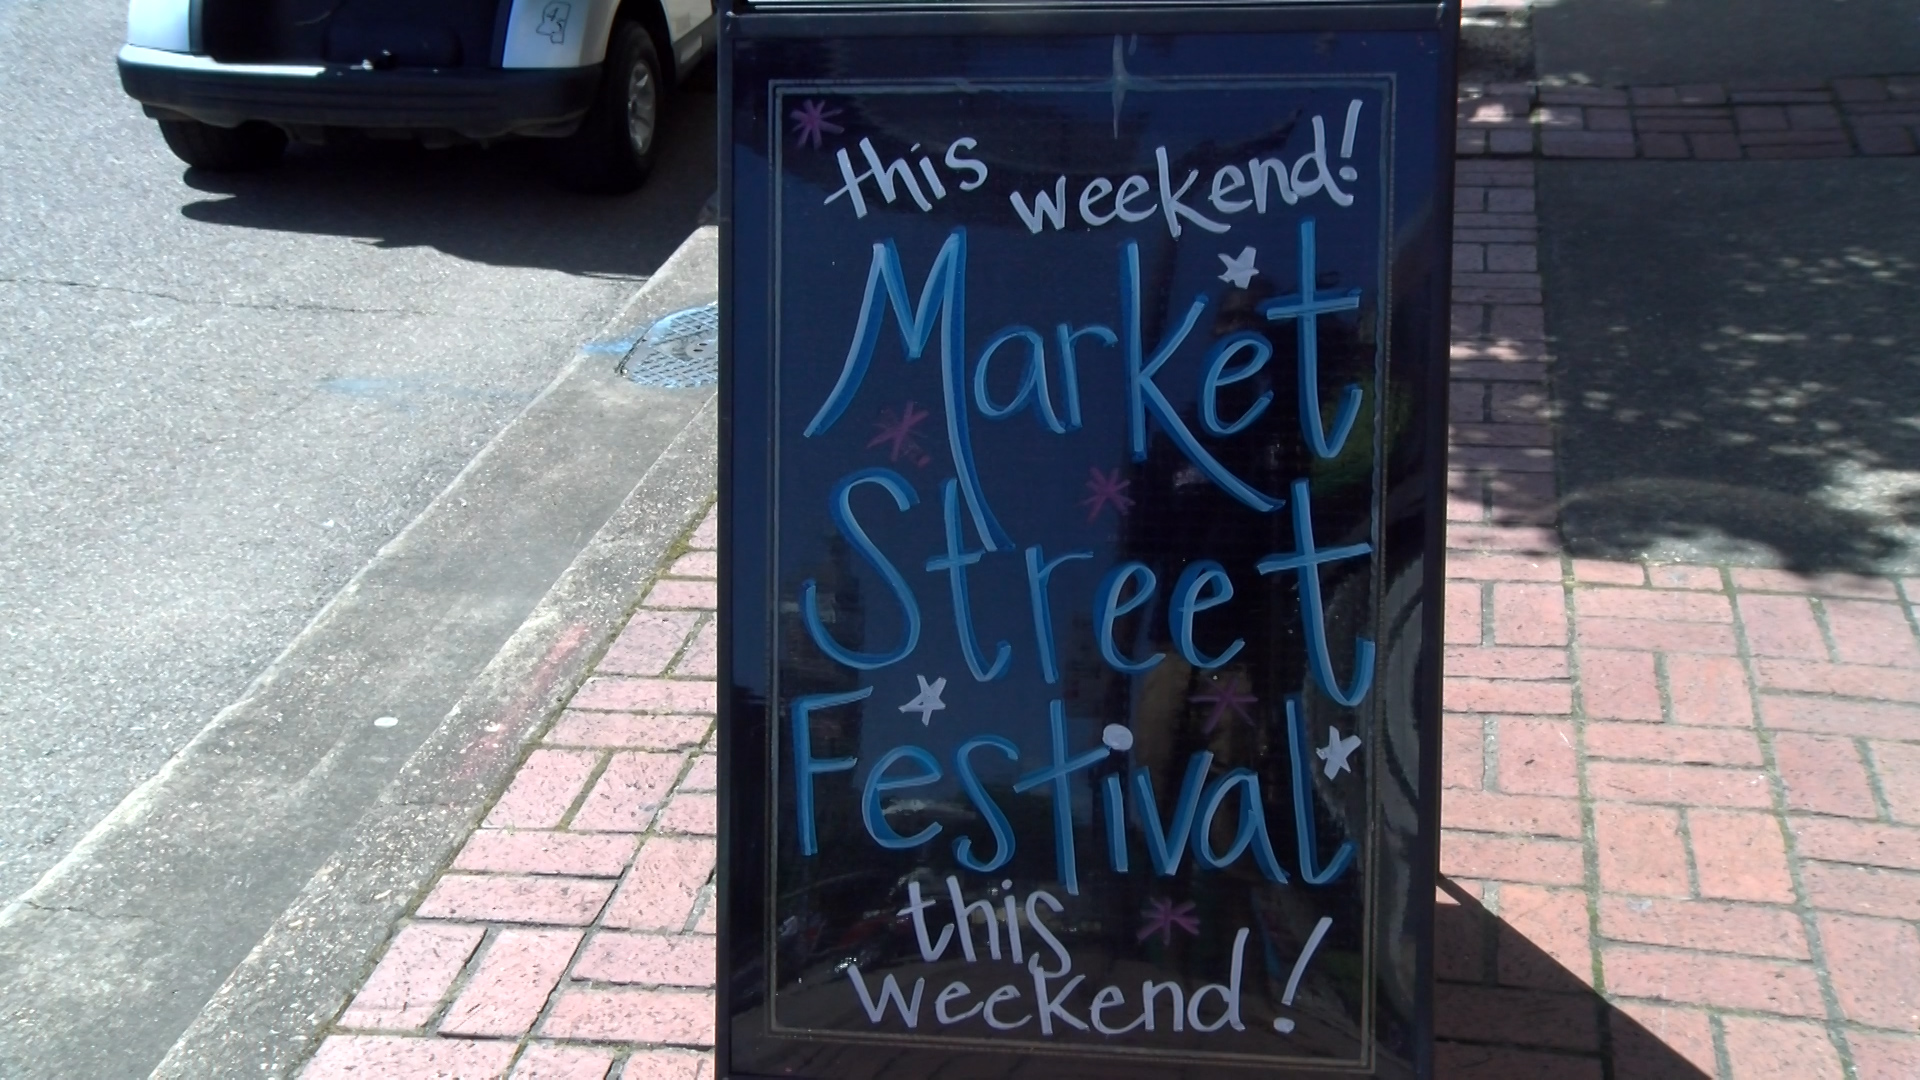 The Market Street Festival brings a blast from the past to the Friendly